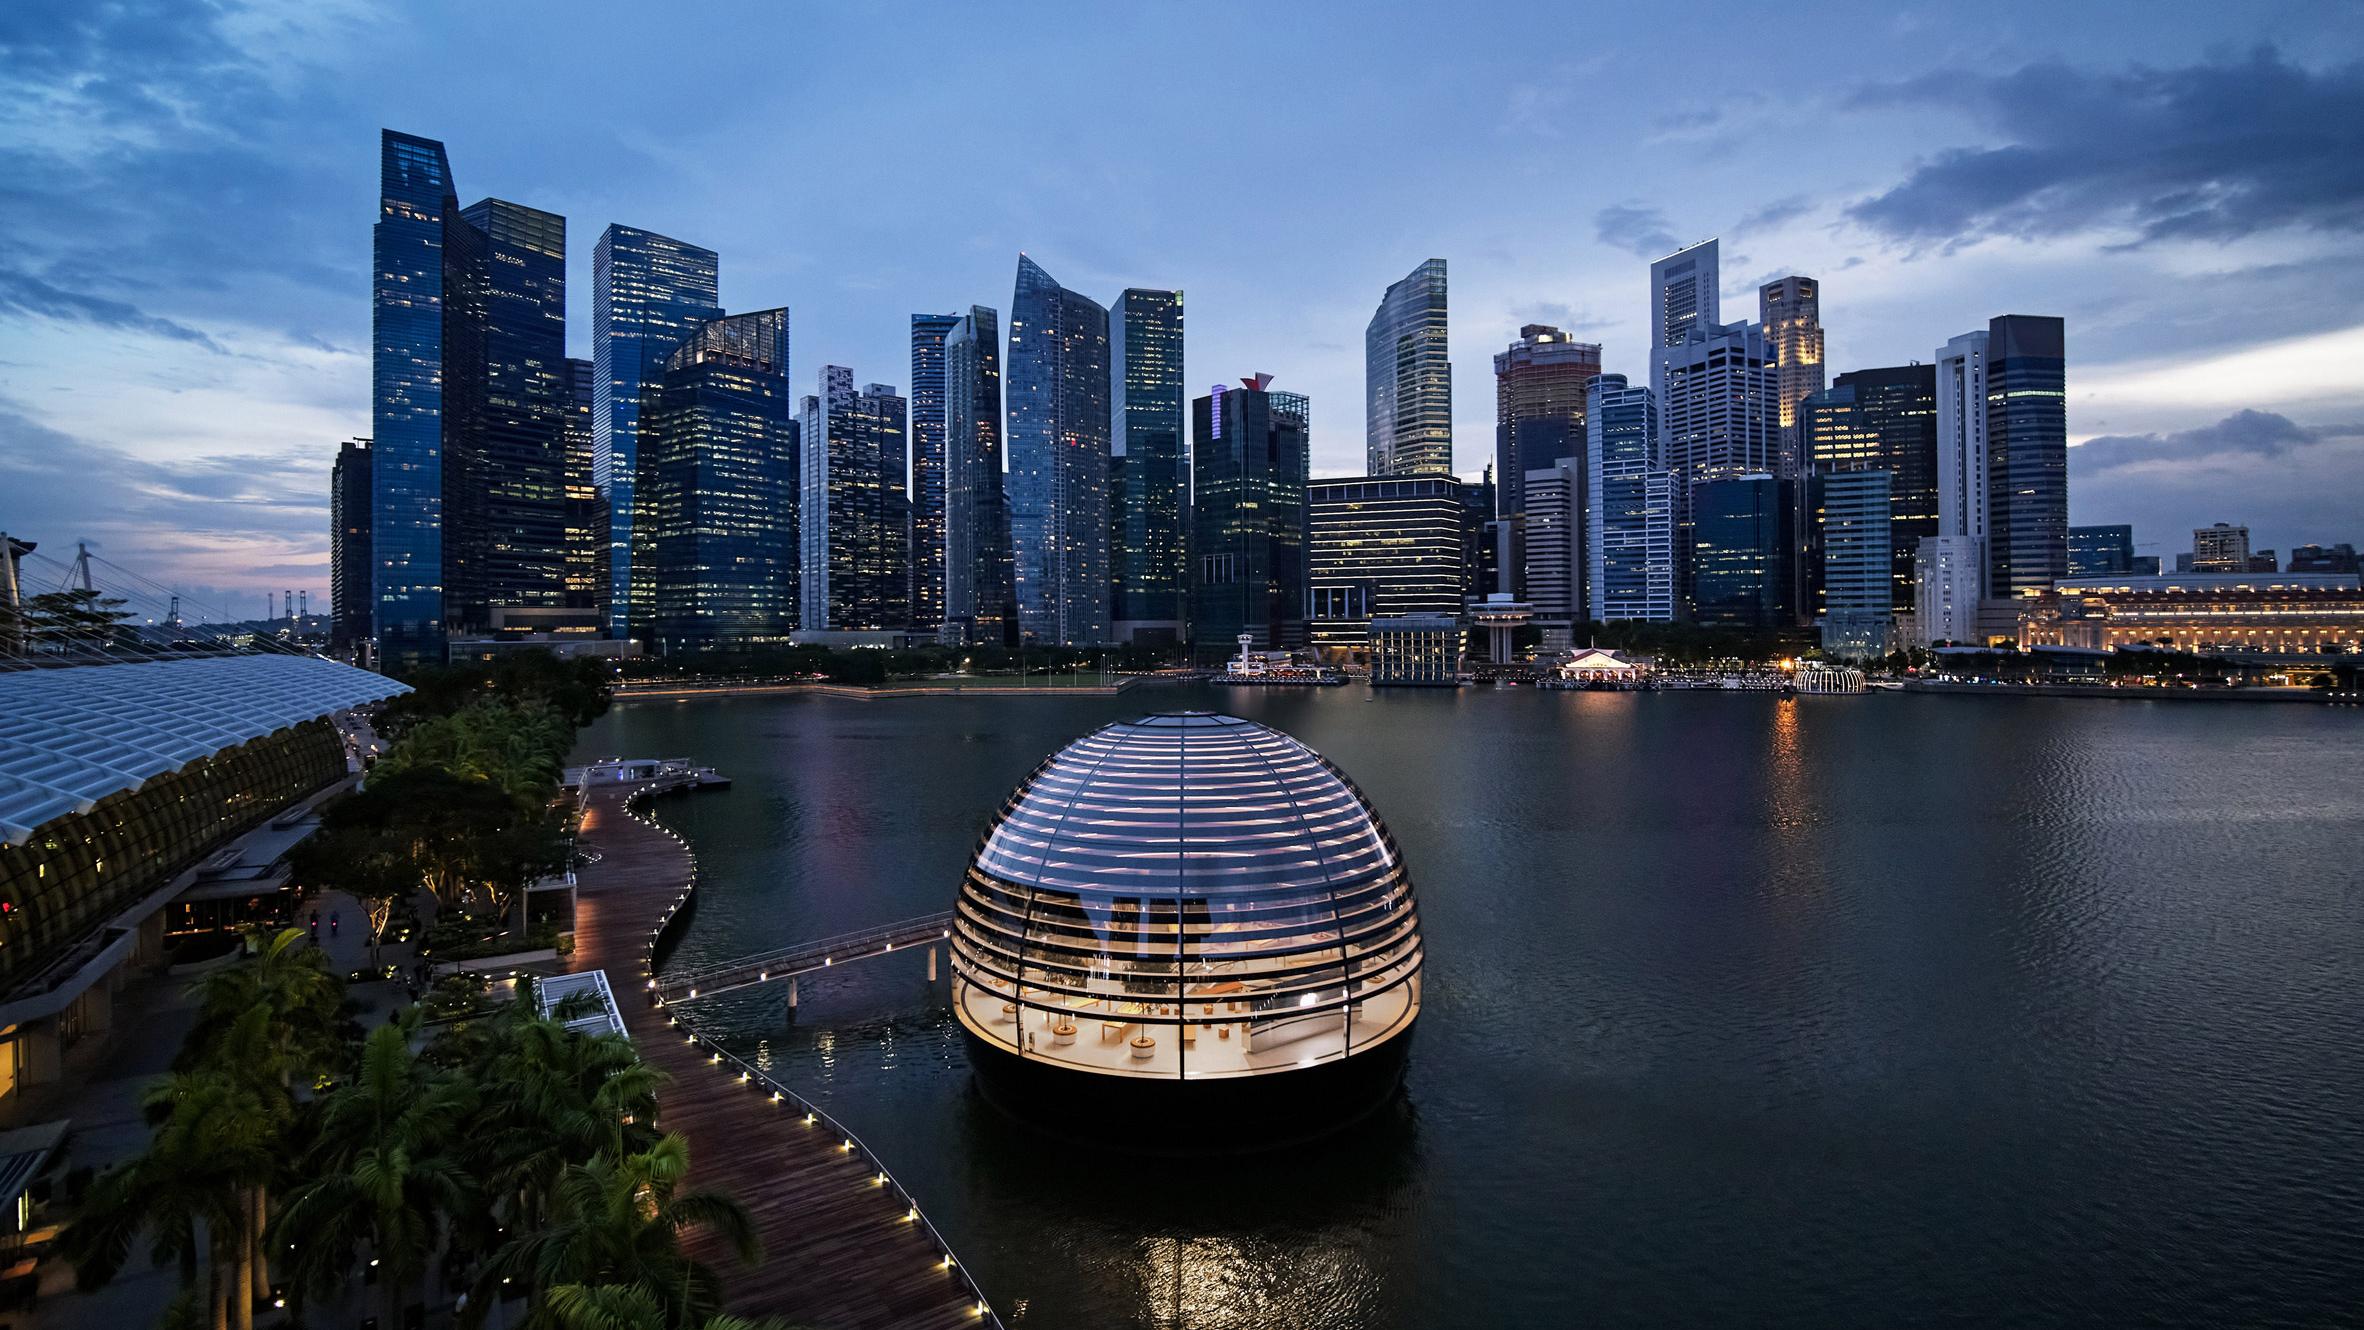 Apple's floating store in Singapore is its architectural crown jewel